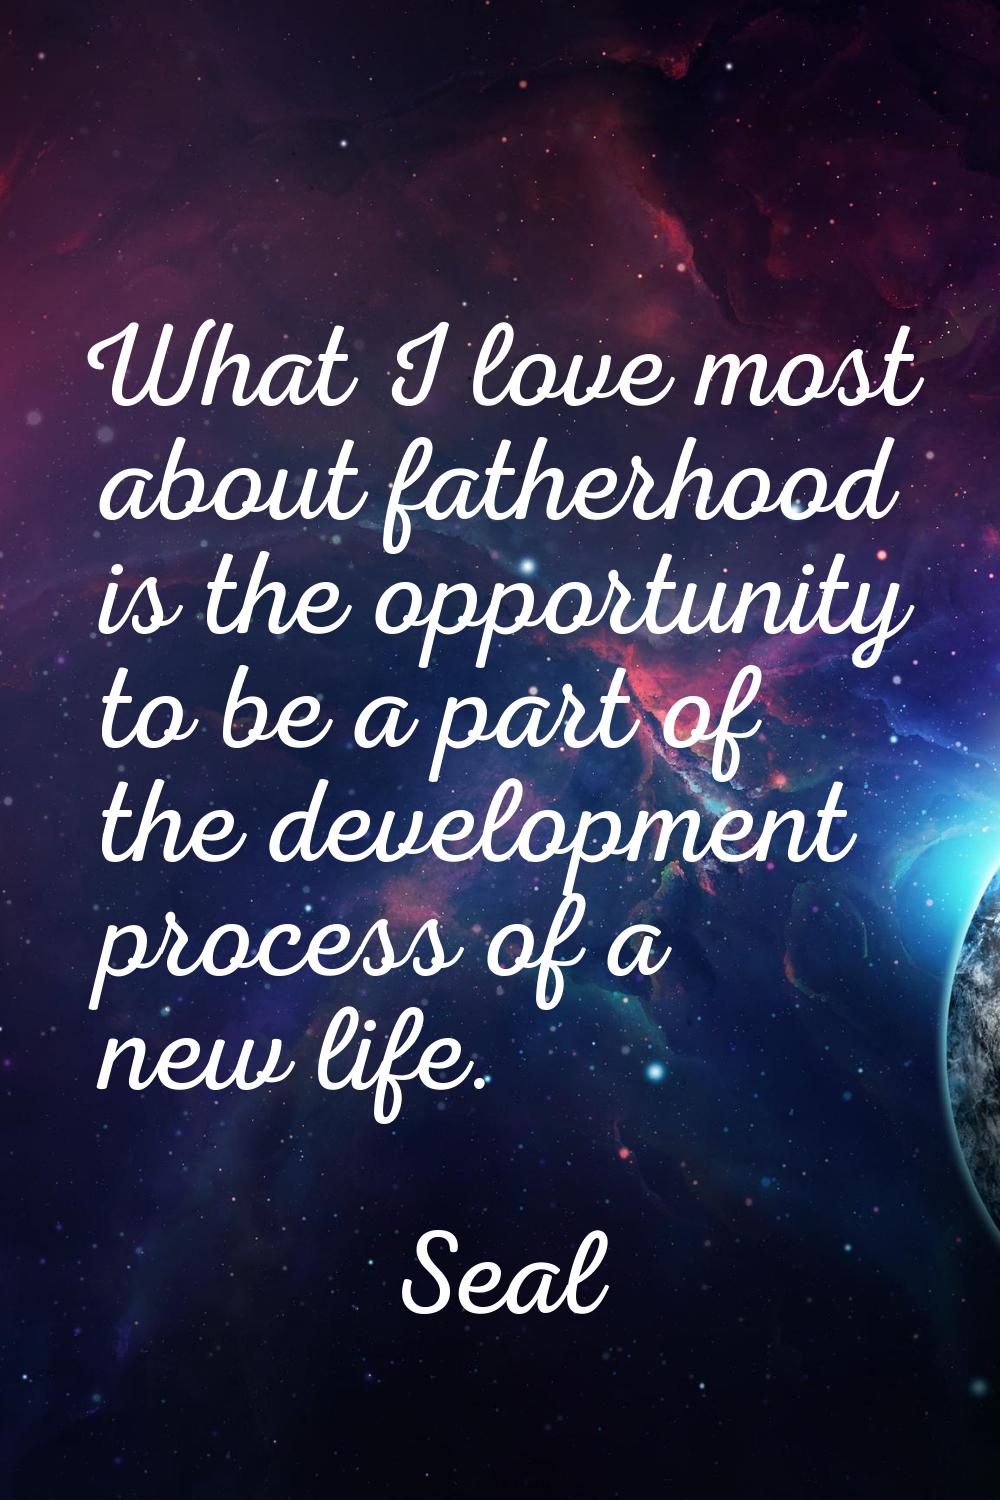 What I love most about fatherhood is the opportunity to be a part of the development process of a n